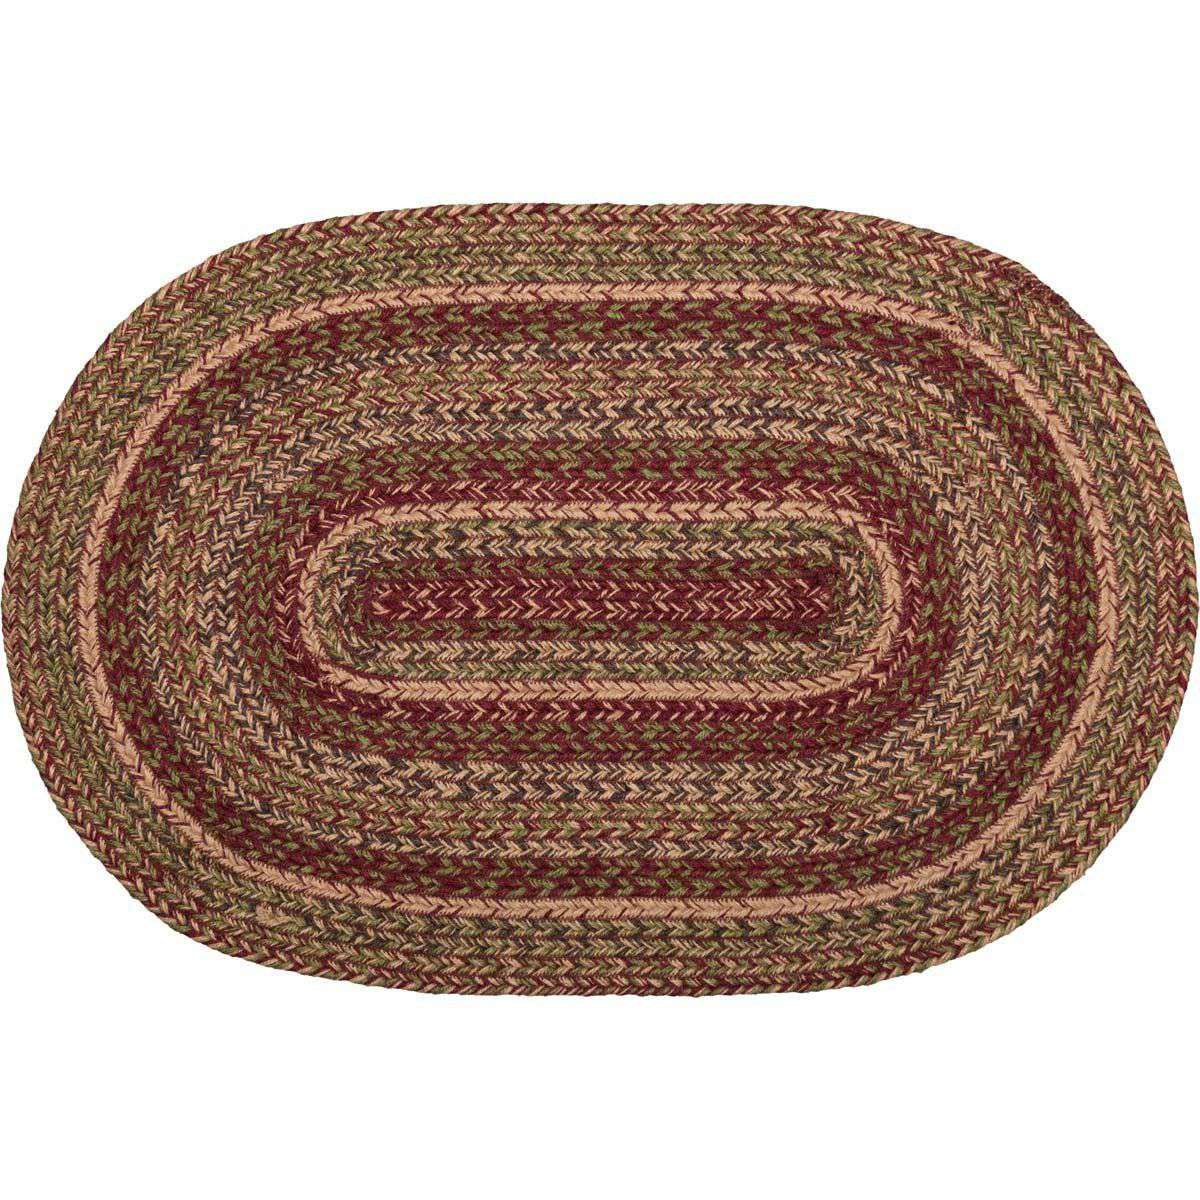 Cider Mill Jute Braided Rugs Oval VHC Brands Rugs VHC Brands 